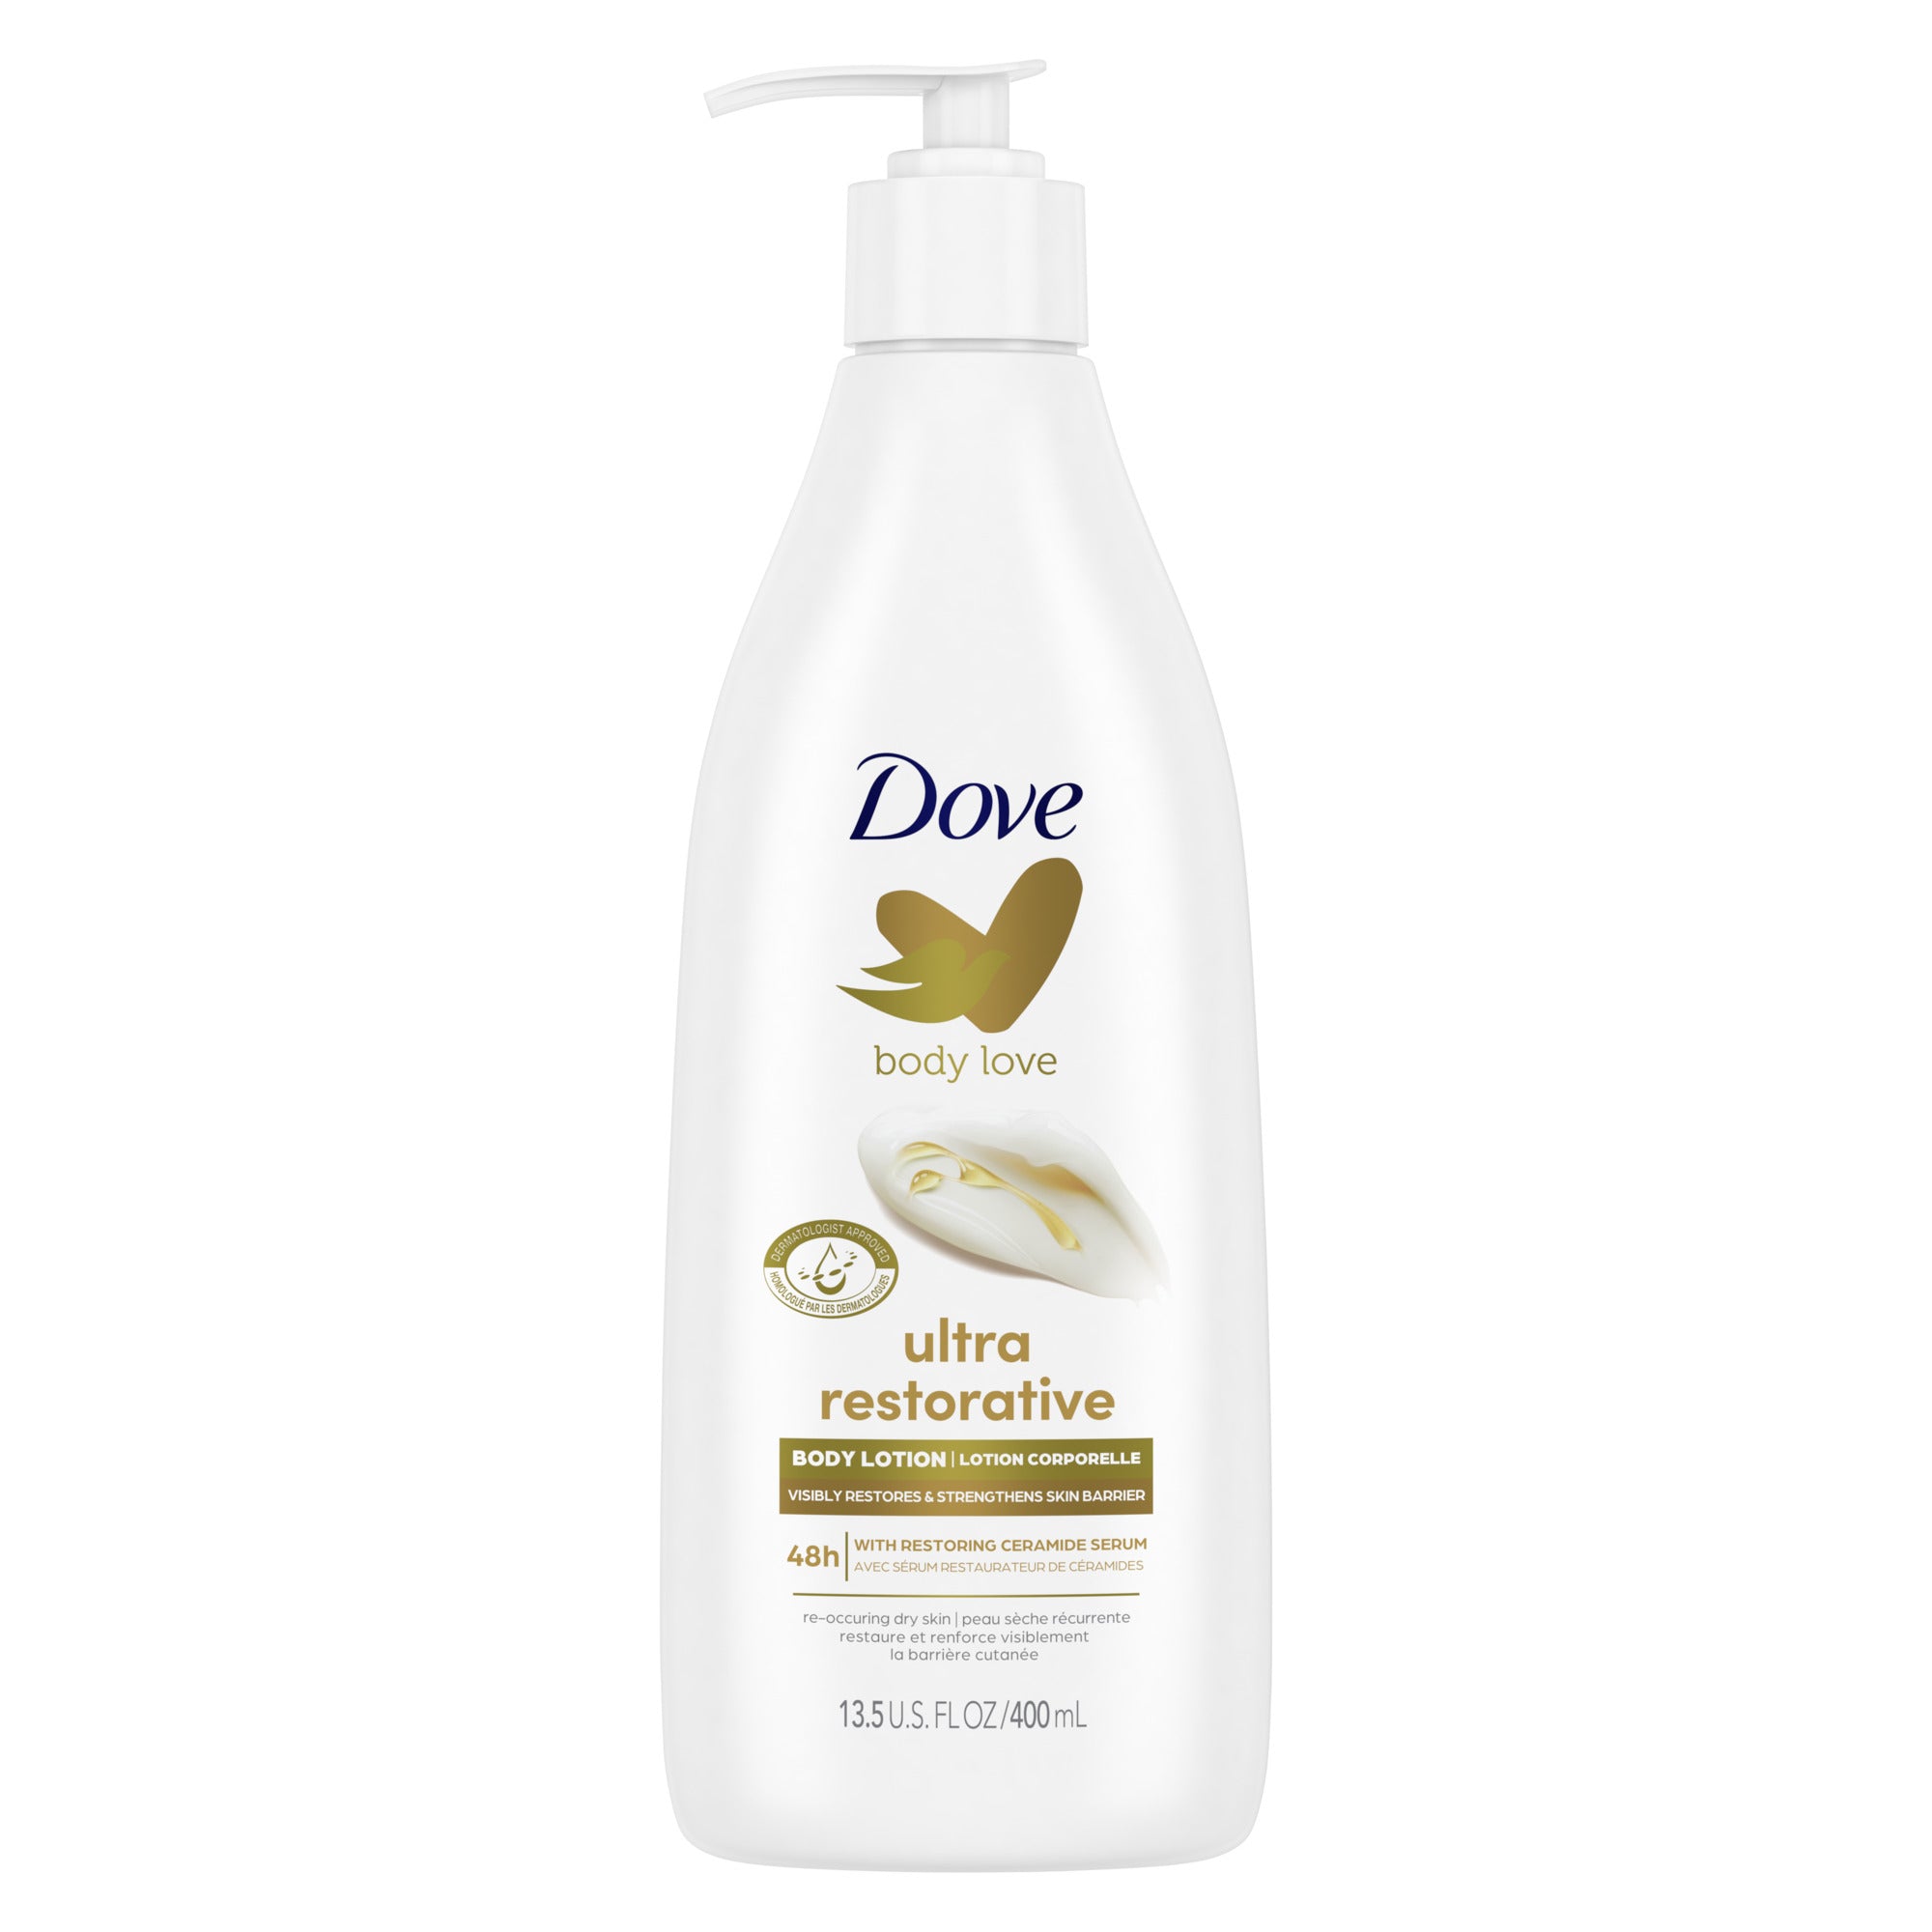 Dove Body Love Ultra Restorative Body Lotion for Re-Occurring Dry Skin that Visibly Restores and Strengthens Skin Barrier 400ml